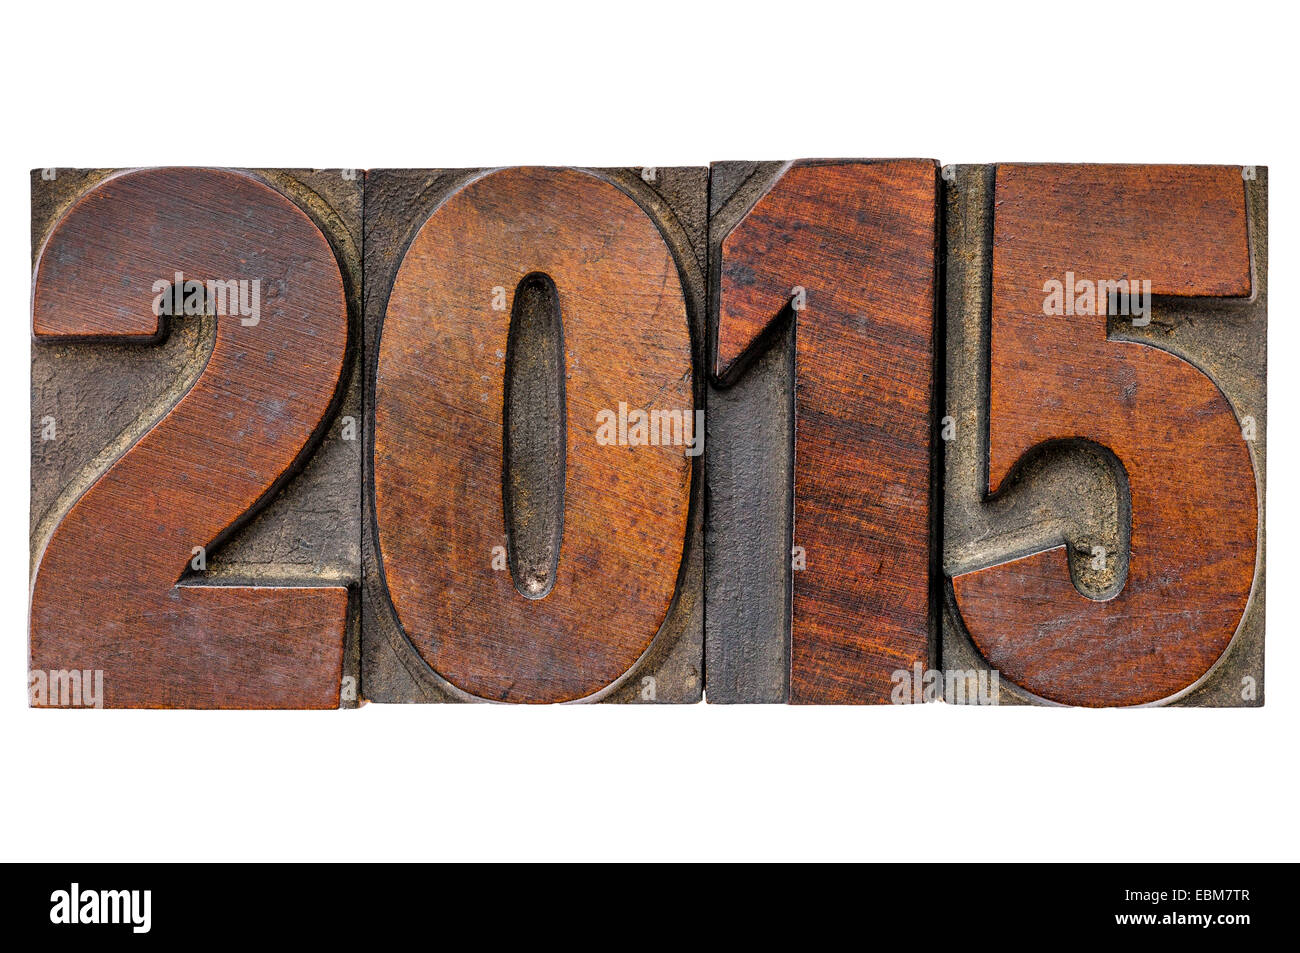 2015  - New Year concept  - isolated text in vintage wood type printing blocks Stock Photo